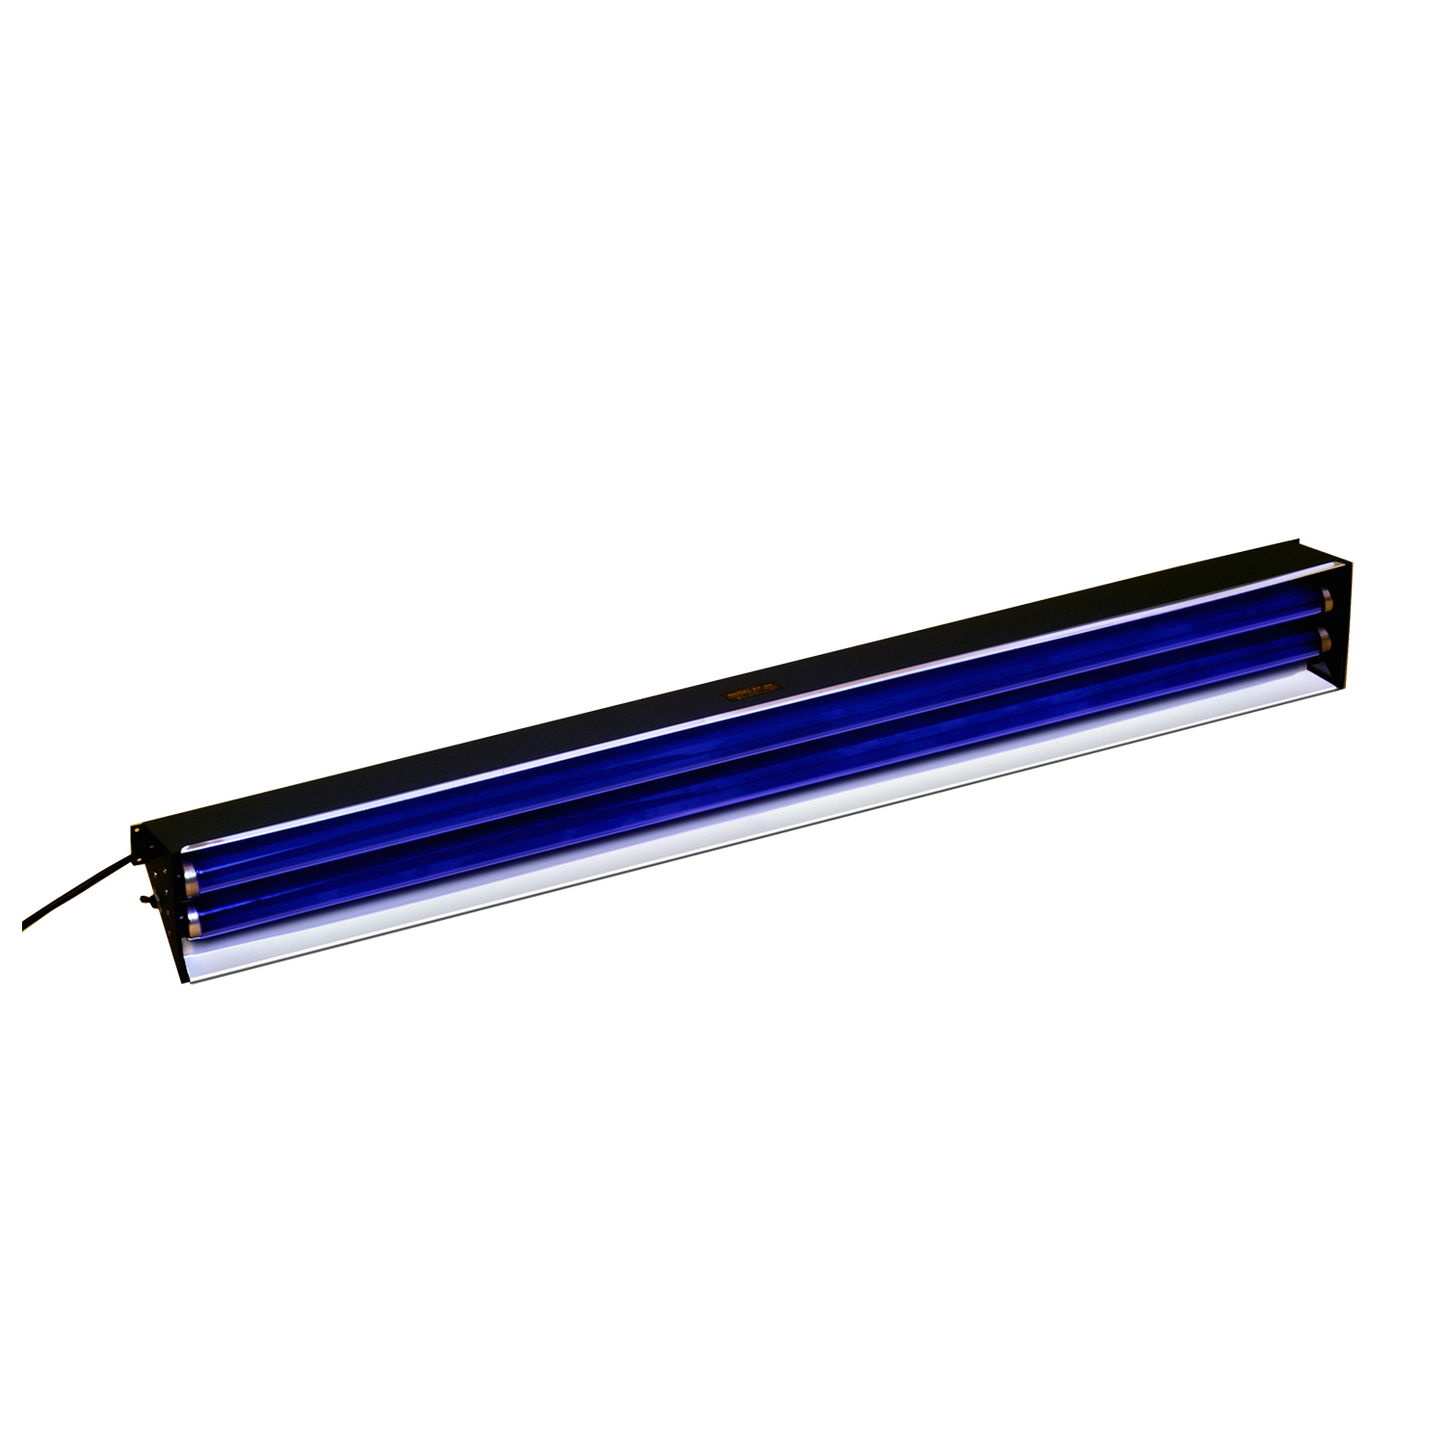 X-Series Bench Lamp 40 Watt BLB Tube Also available in foreign voltages